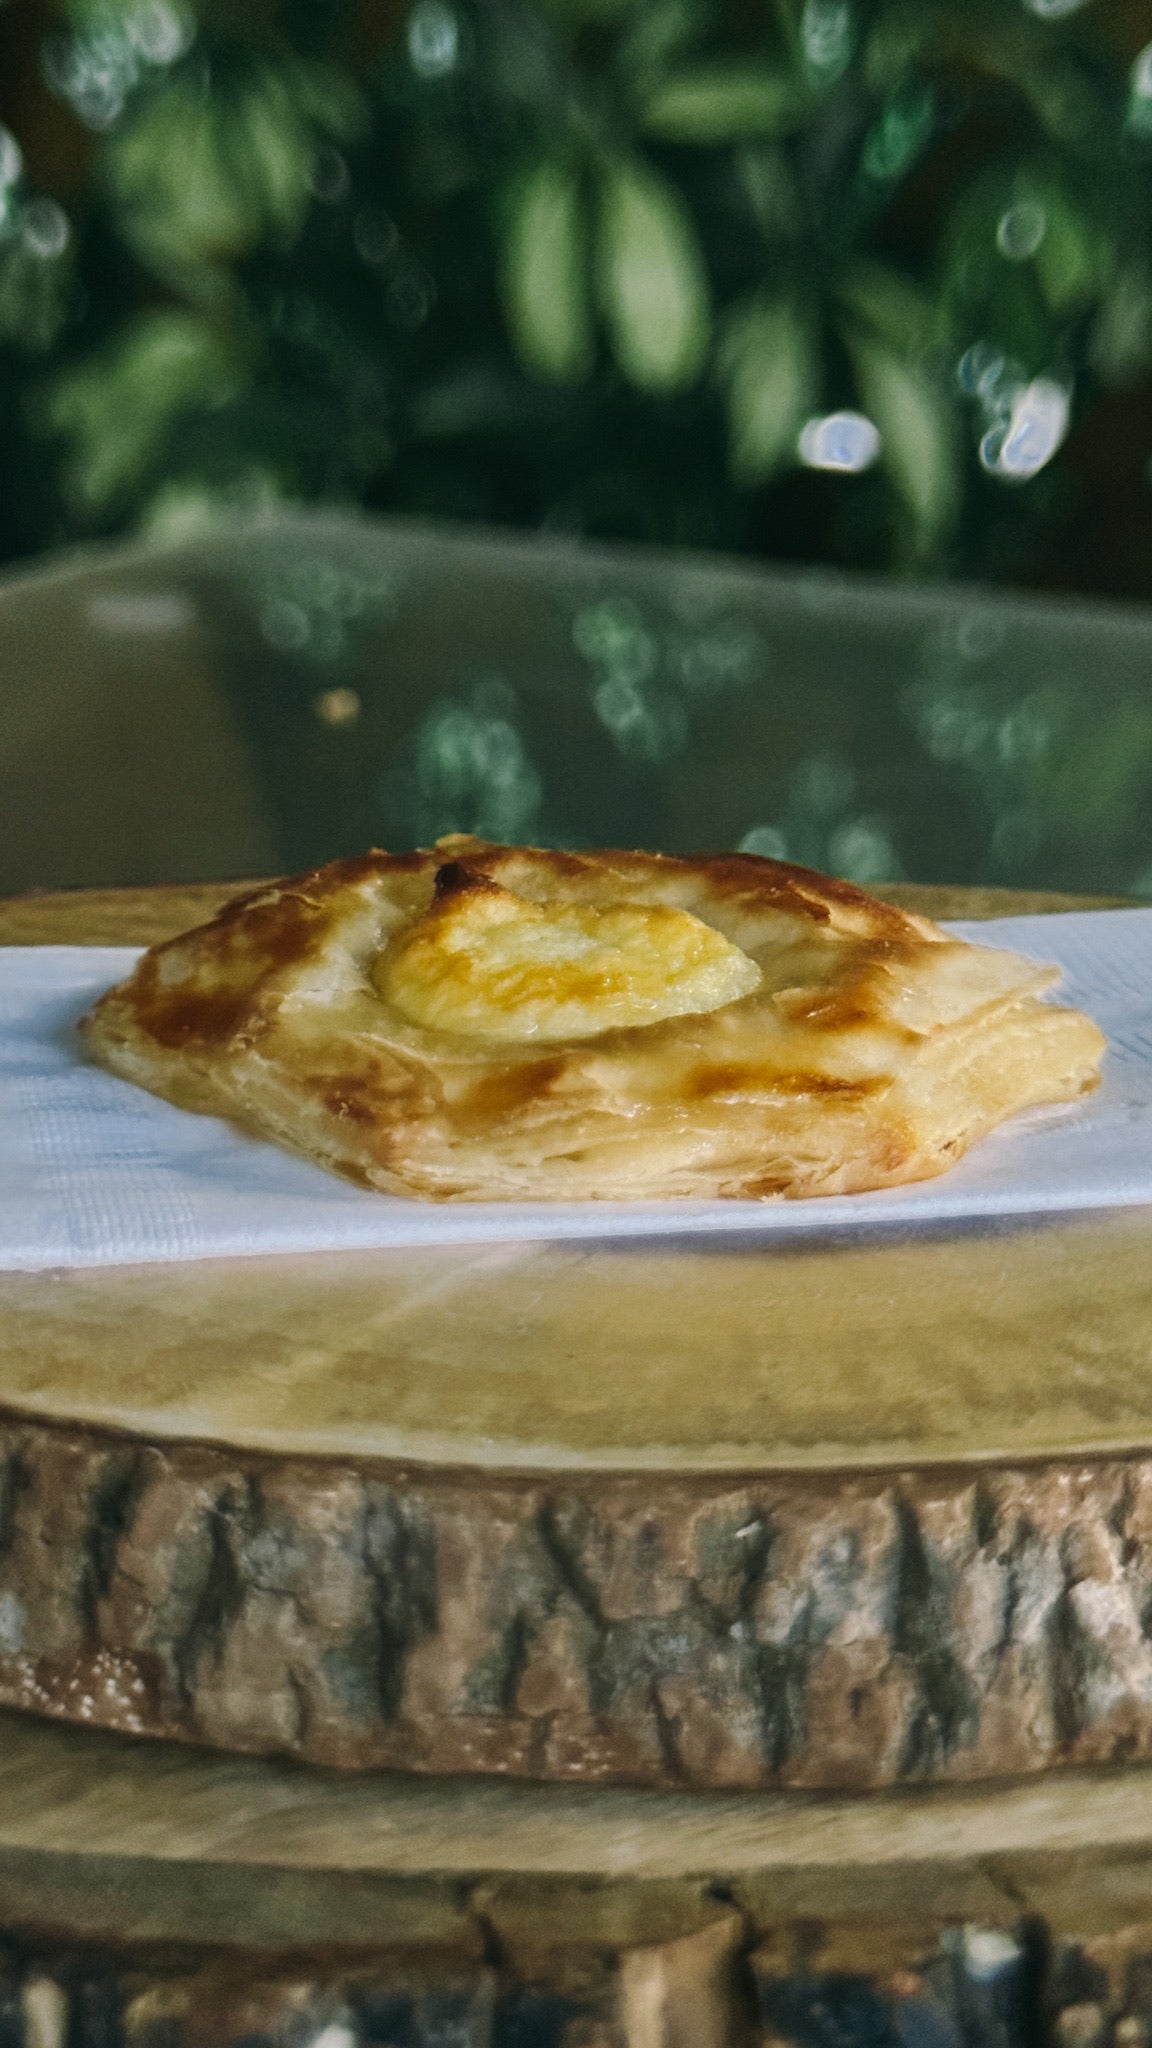 Facturas (Argentinian Pastry)